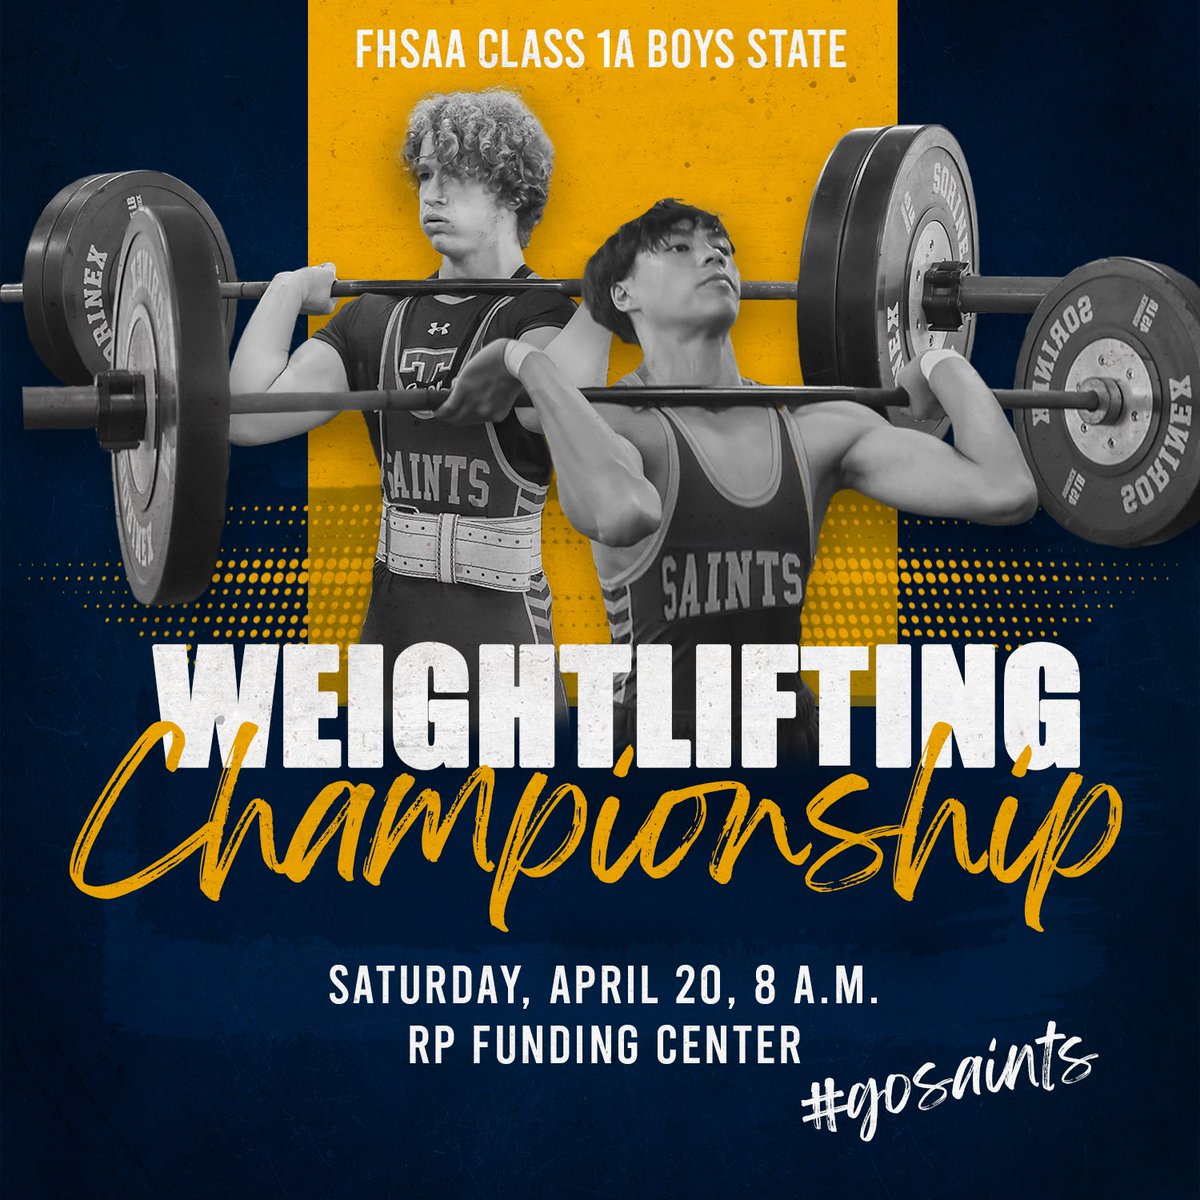 Best of luck to Mason P. '25 and Michael S. '26 at today's FHSAA State Weightlifting Championship Meet! #GoSaints